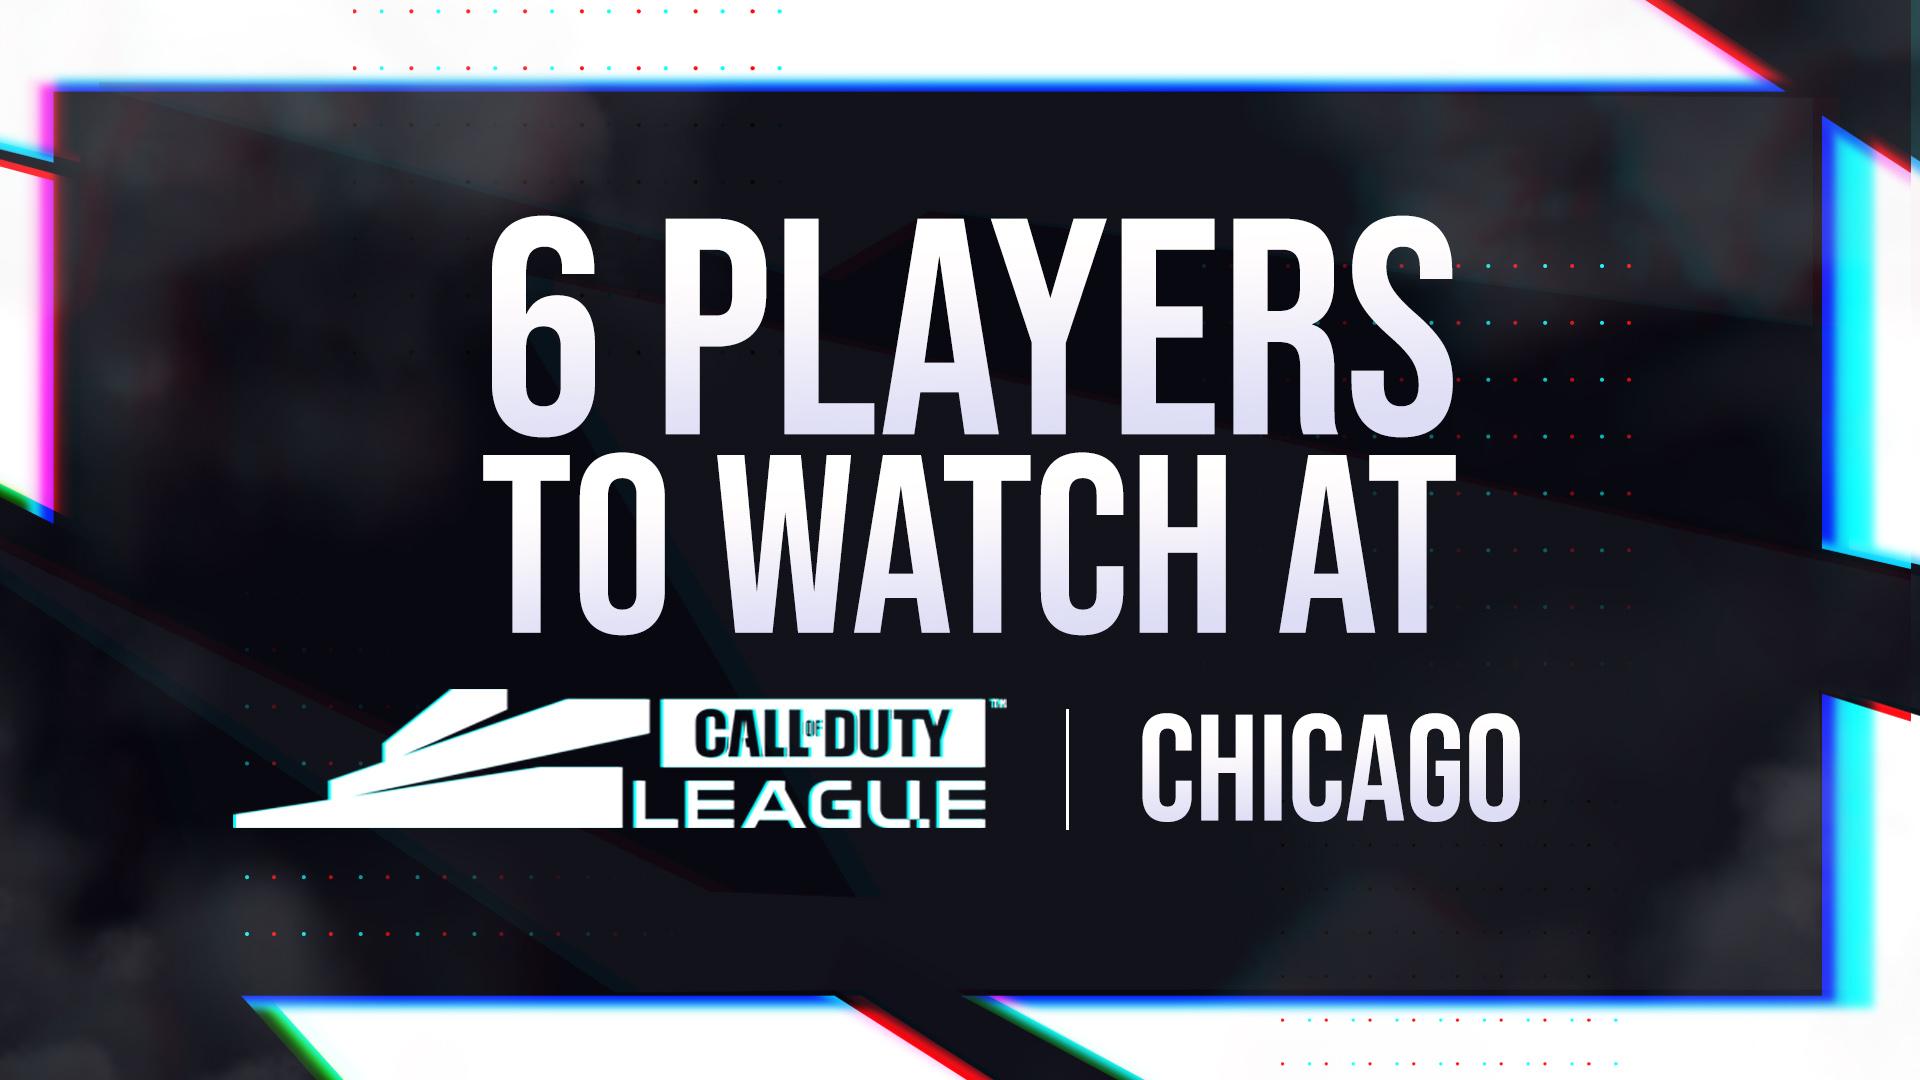 6 players to watch during CDL Chicago.